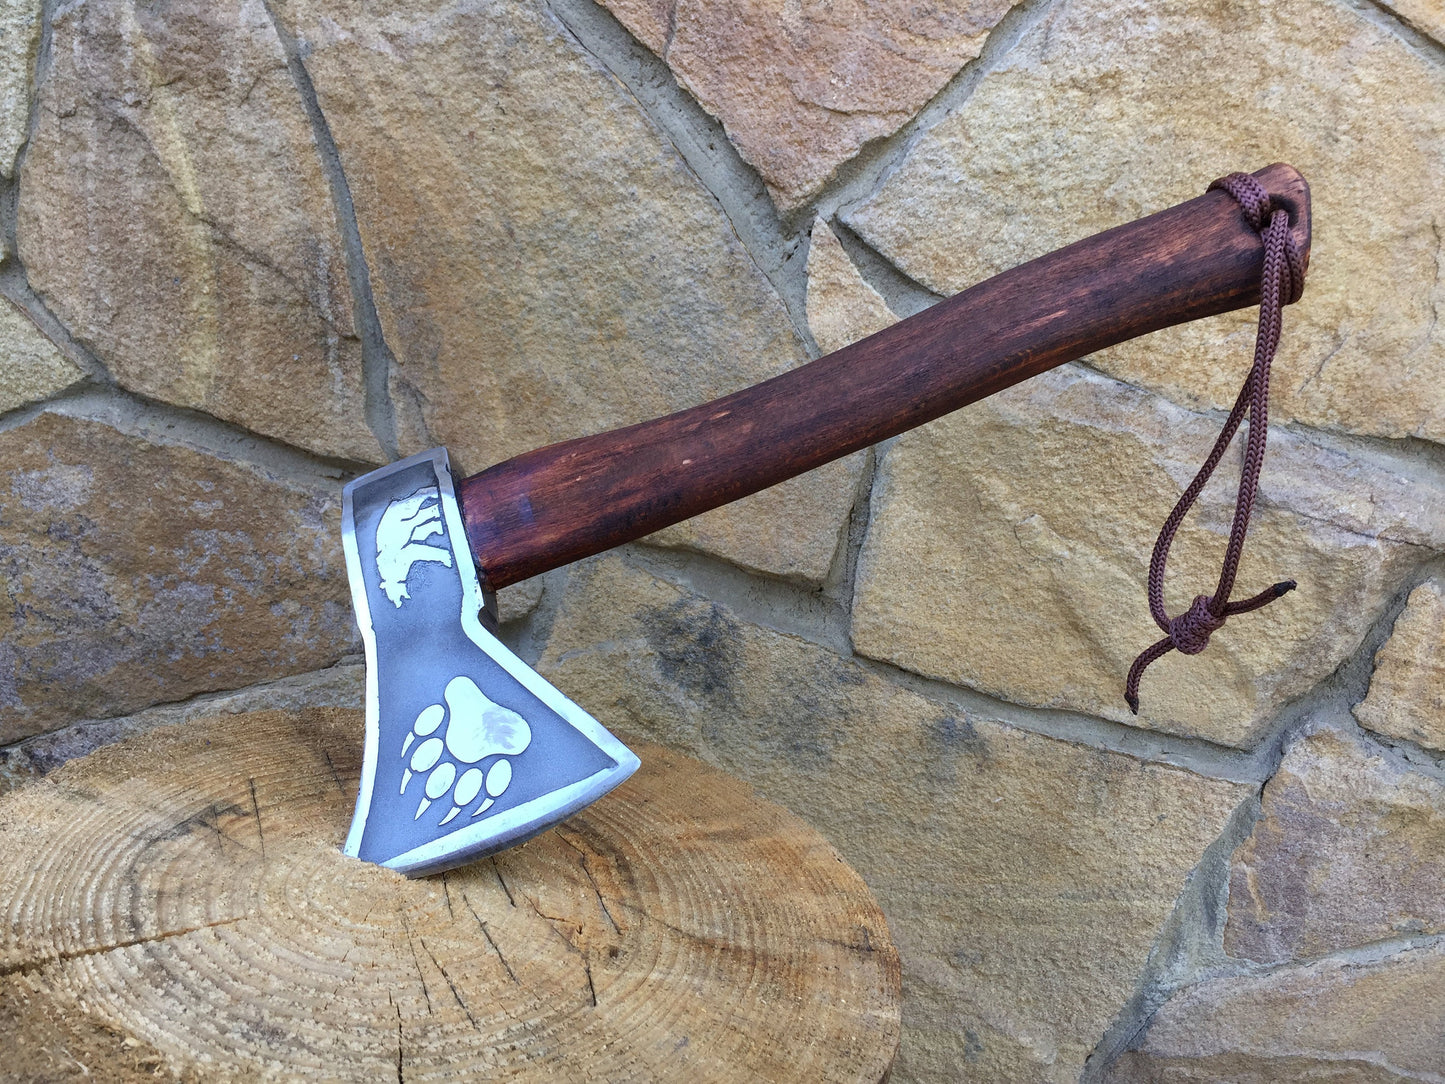 Viking axe, mens gifts, medieval axe, tomahawk, hatchet, Middle Ages, gift for boyfriend, wow birthday gift, best men gift, graduation gift